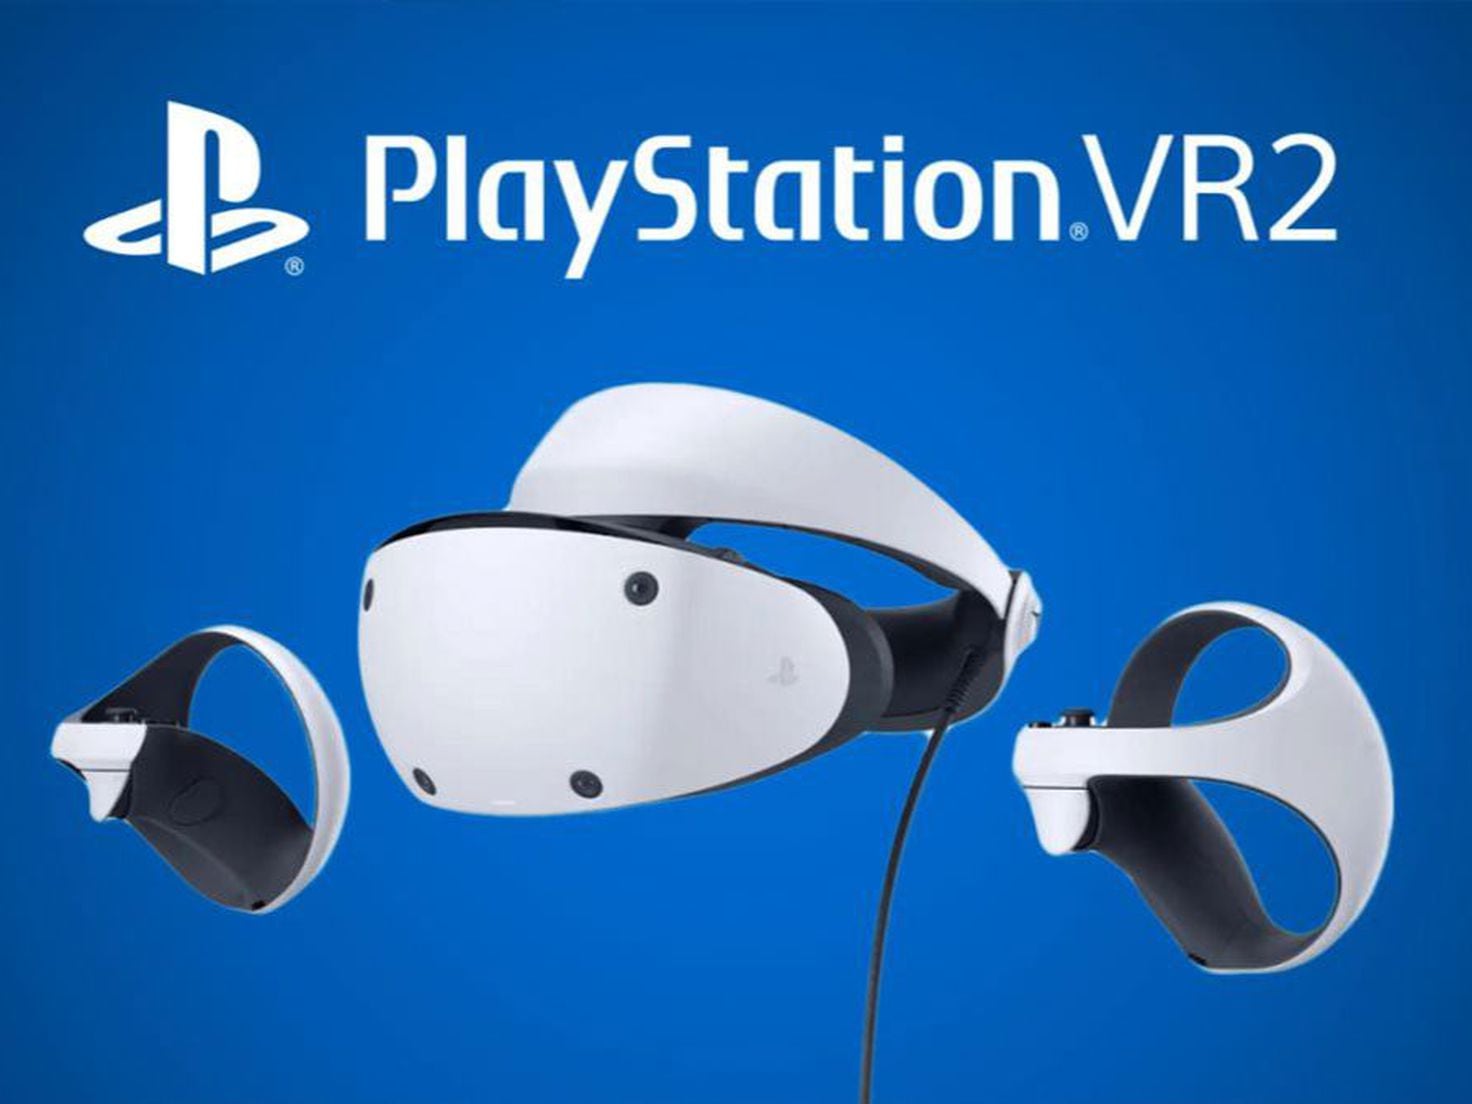 PlayStation VR2 shows off its exciting new modes and features